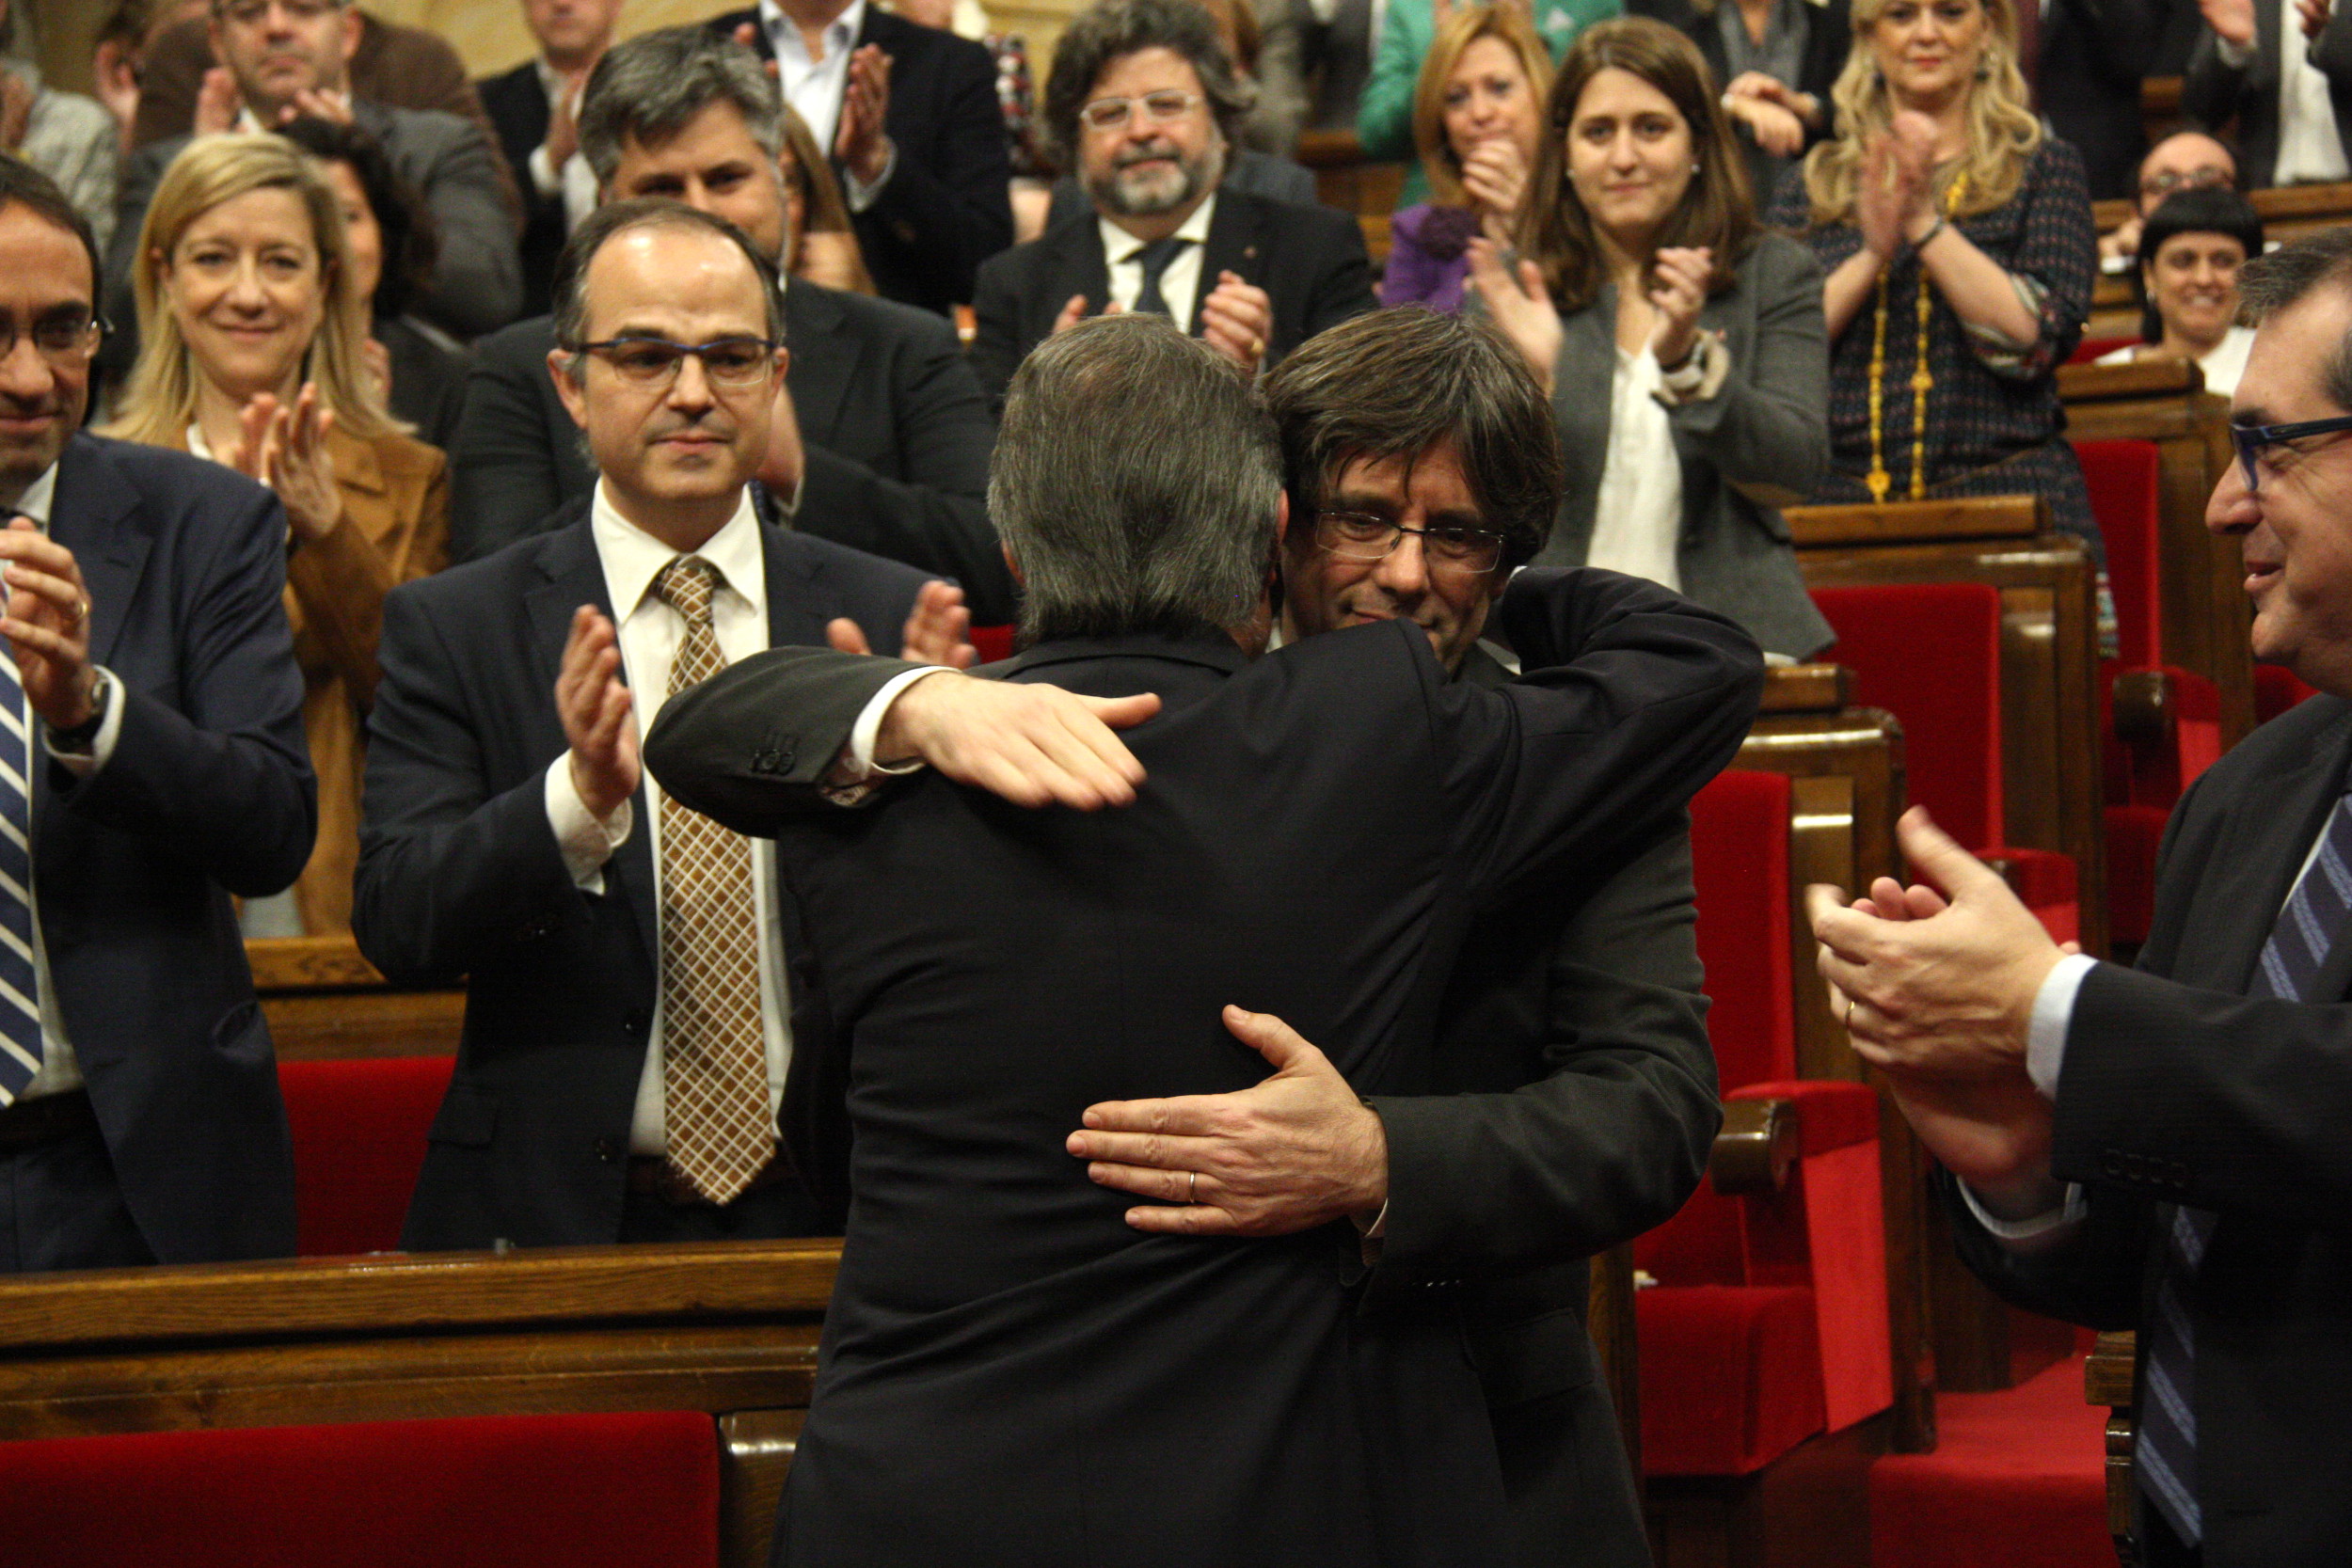 Current President, Artur Mas embracing the new Catalan President, Carles Puigdemont (by ACN)